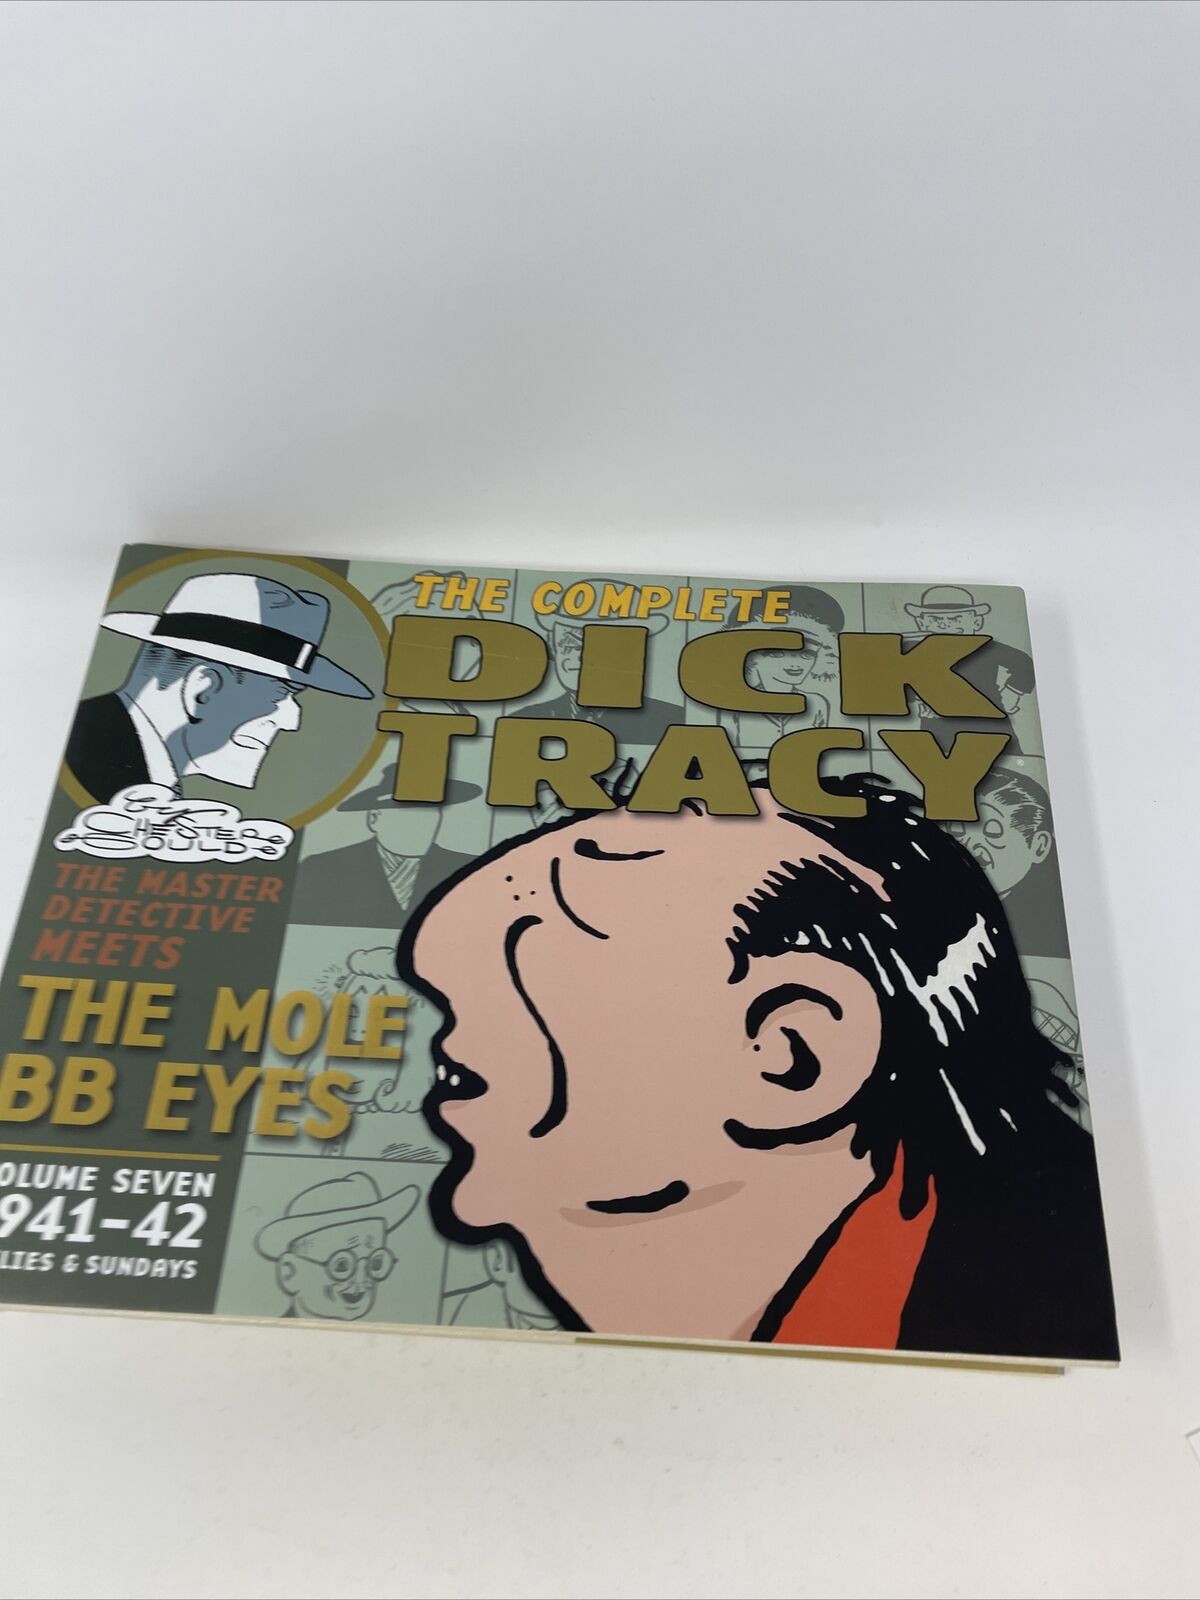 Complete Dick Tracy The Master Detective Meets The Mole BB Eyes Volume 7 1941-42